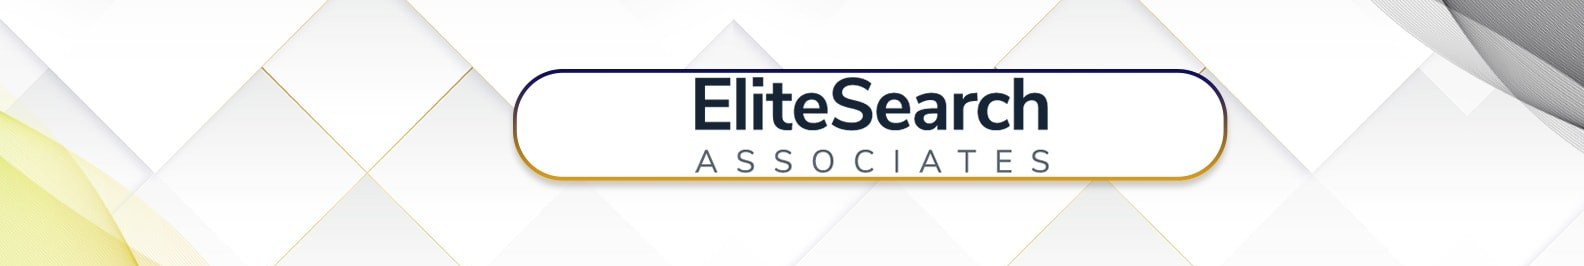 Elite Search Associates Limited background